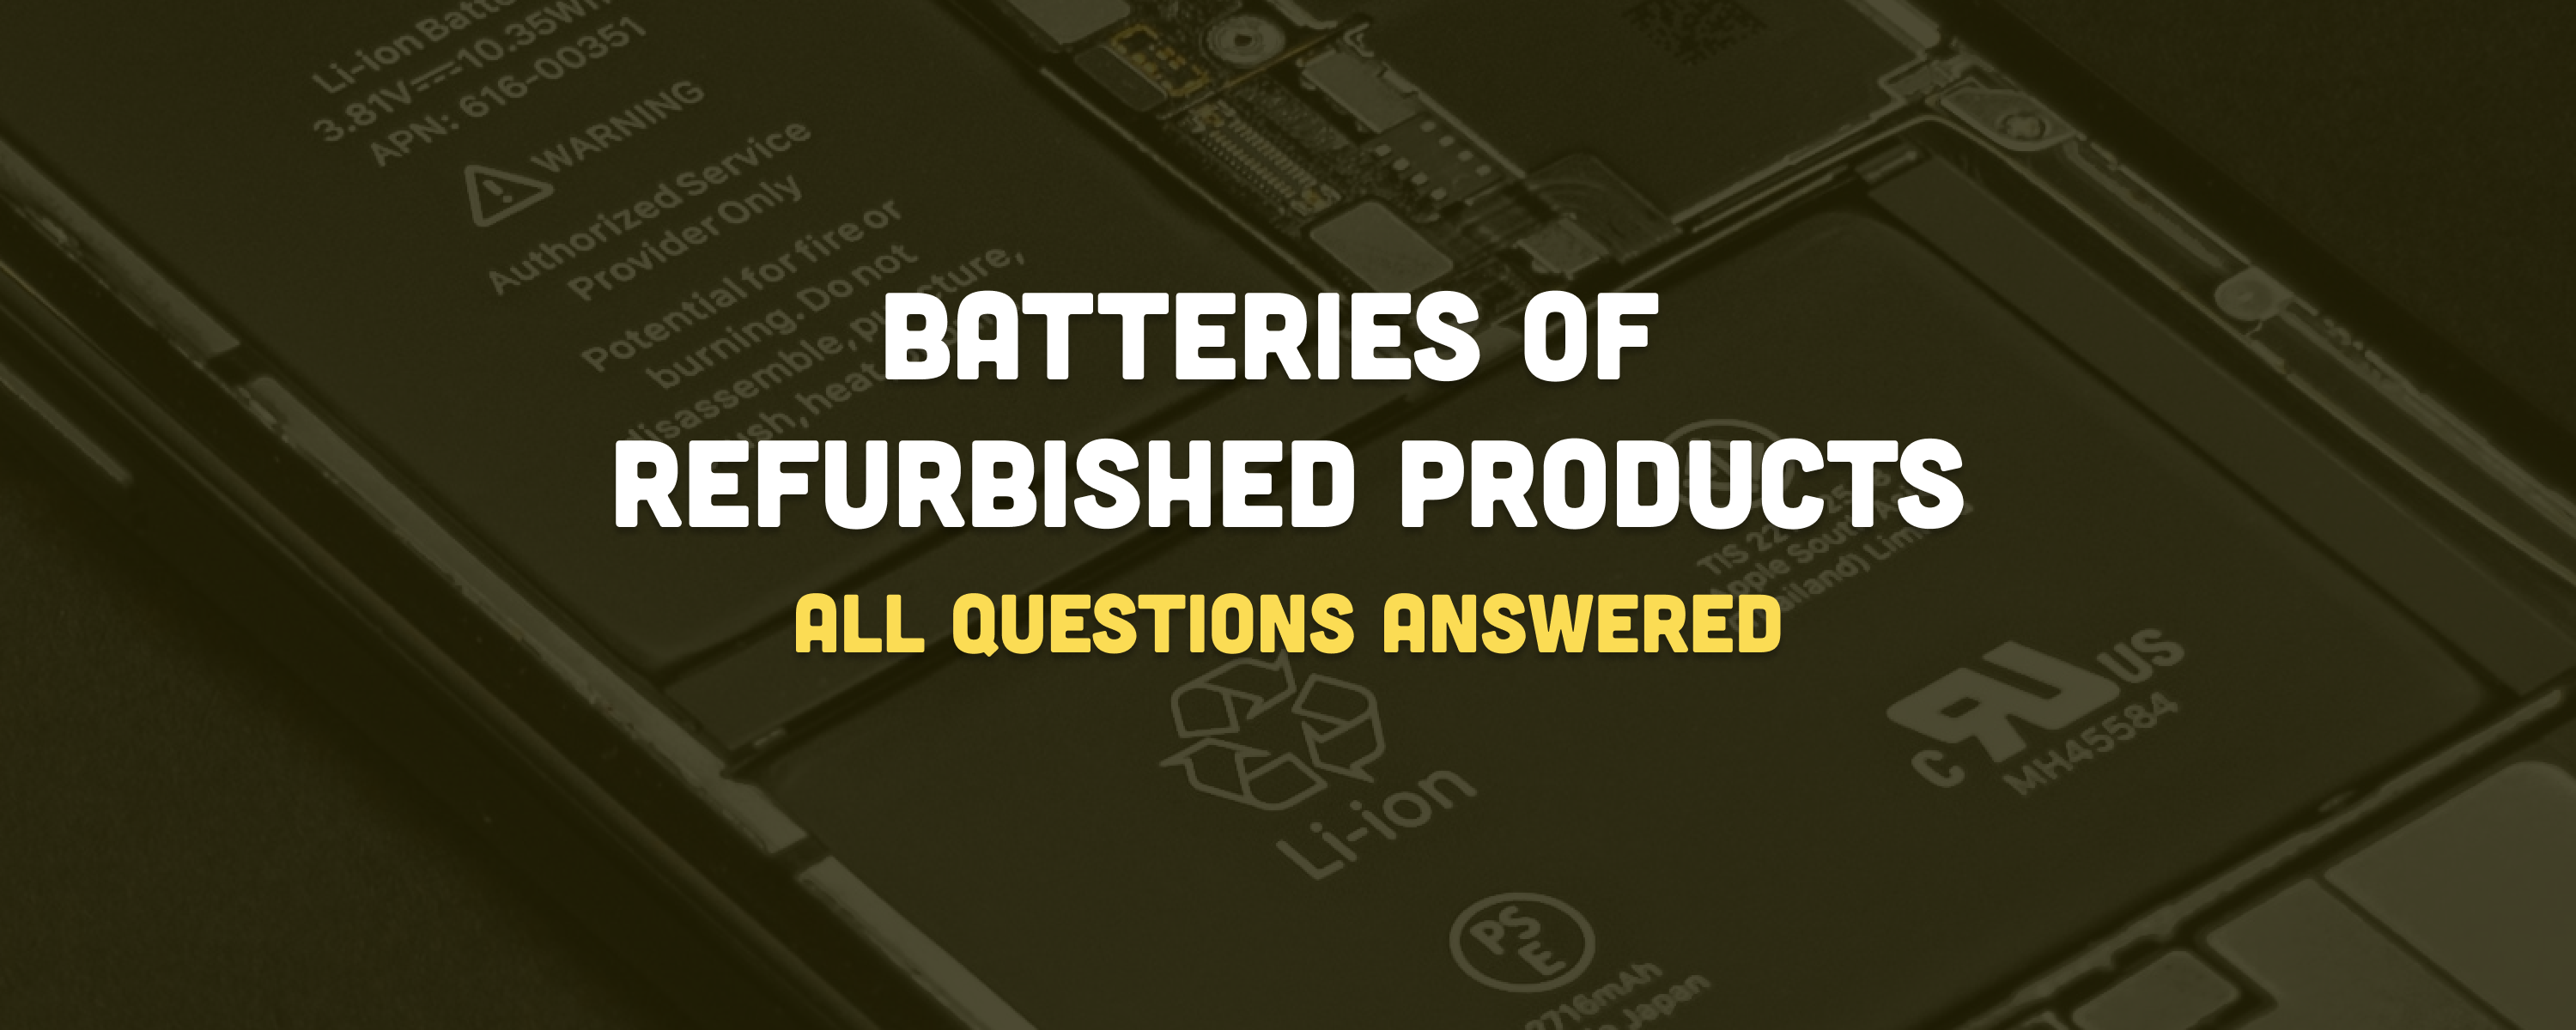 Batteries of Refurbished Products: All Questions Answered